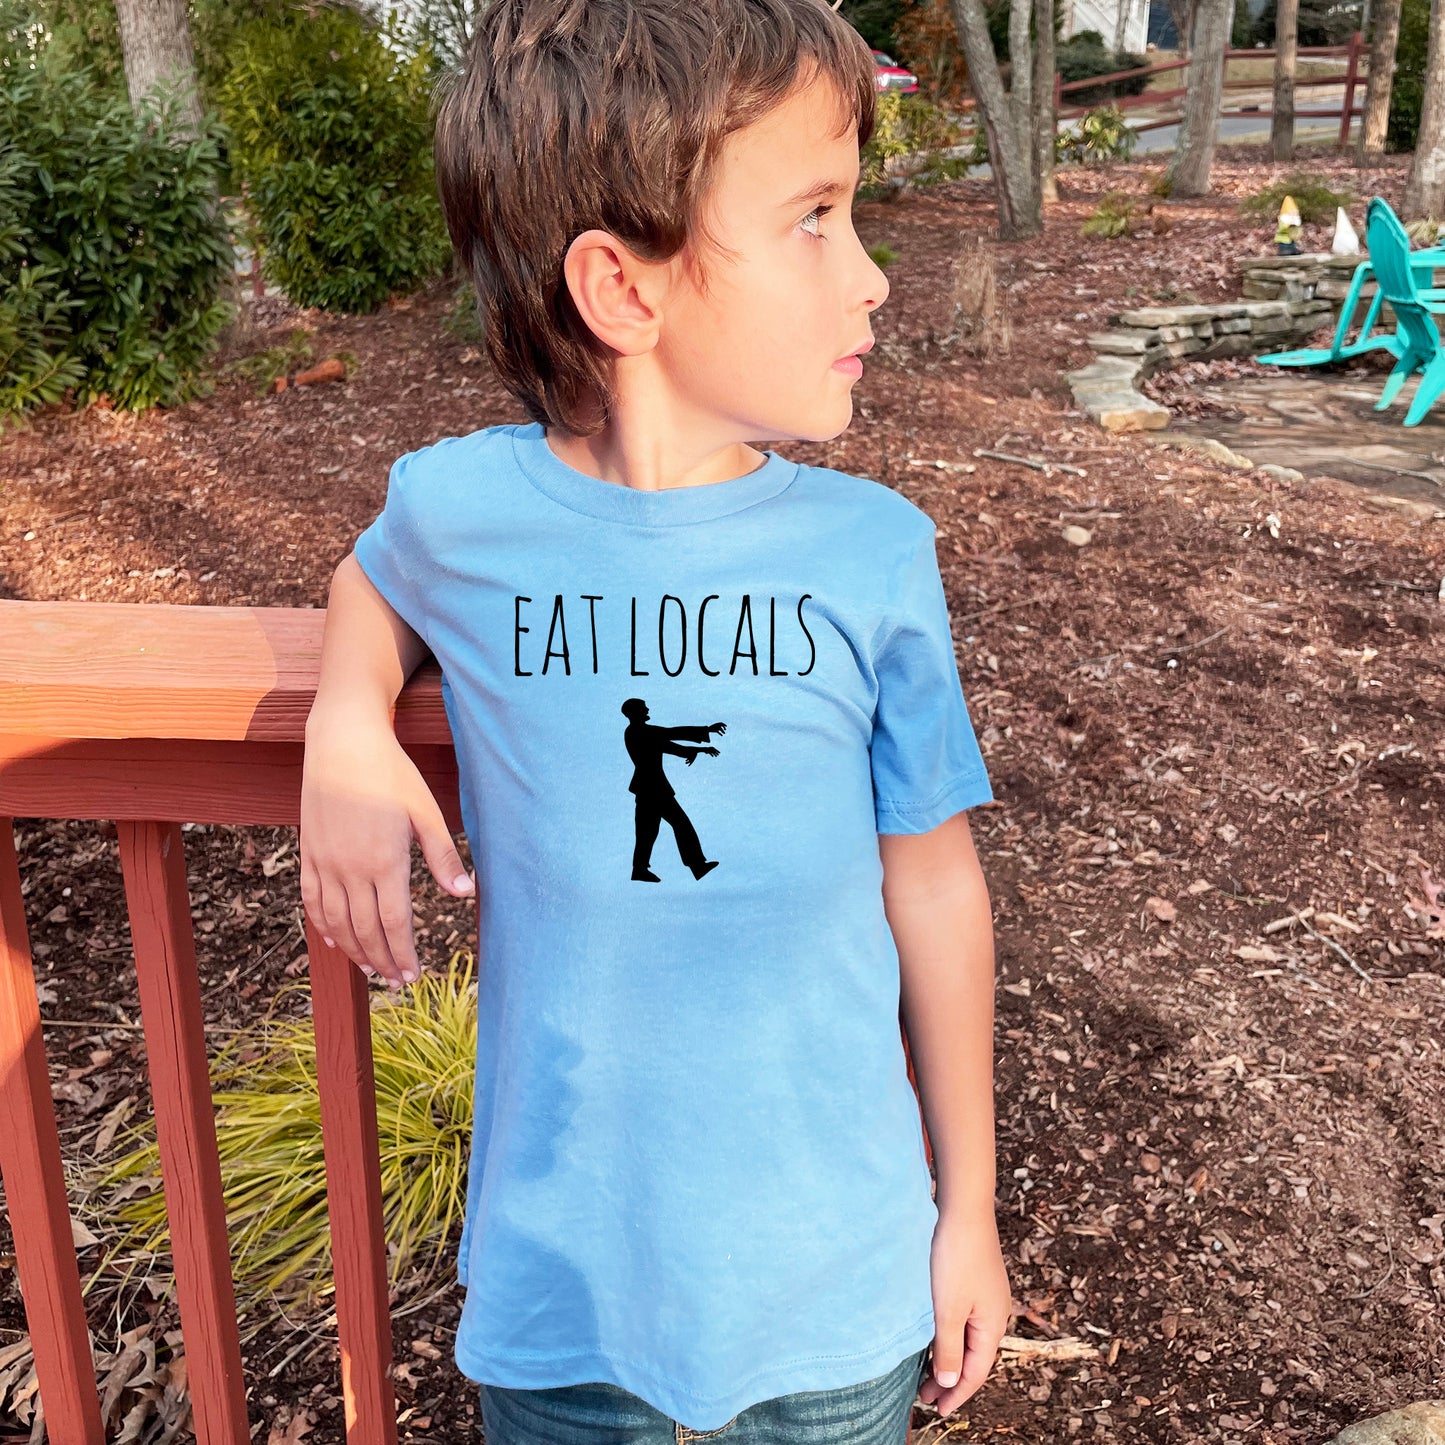 Eat Locals (Zombie) - Kid's Tee - Columbia Blue or Lavender